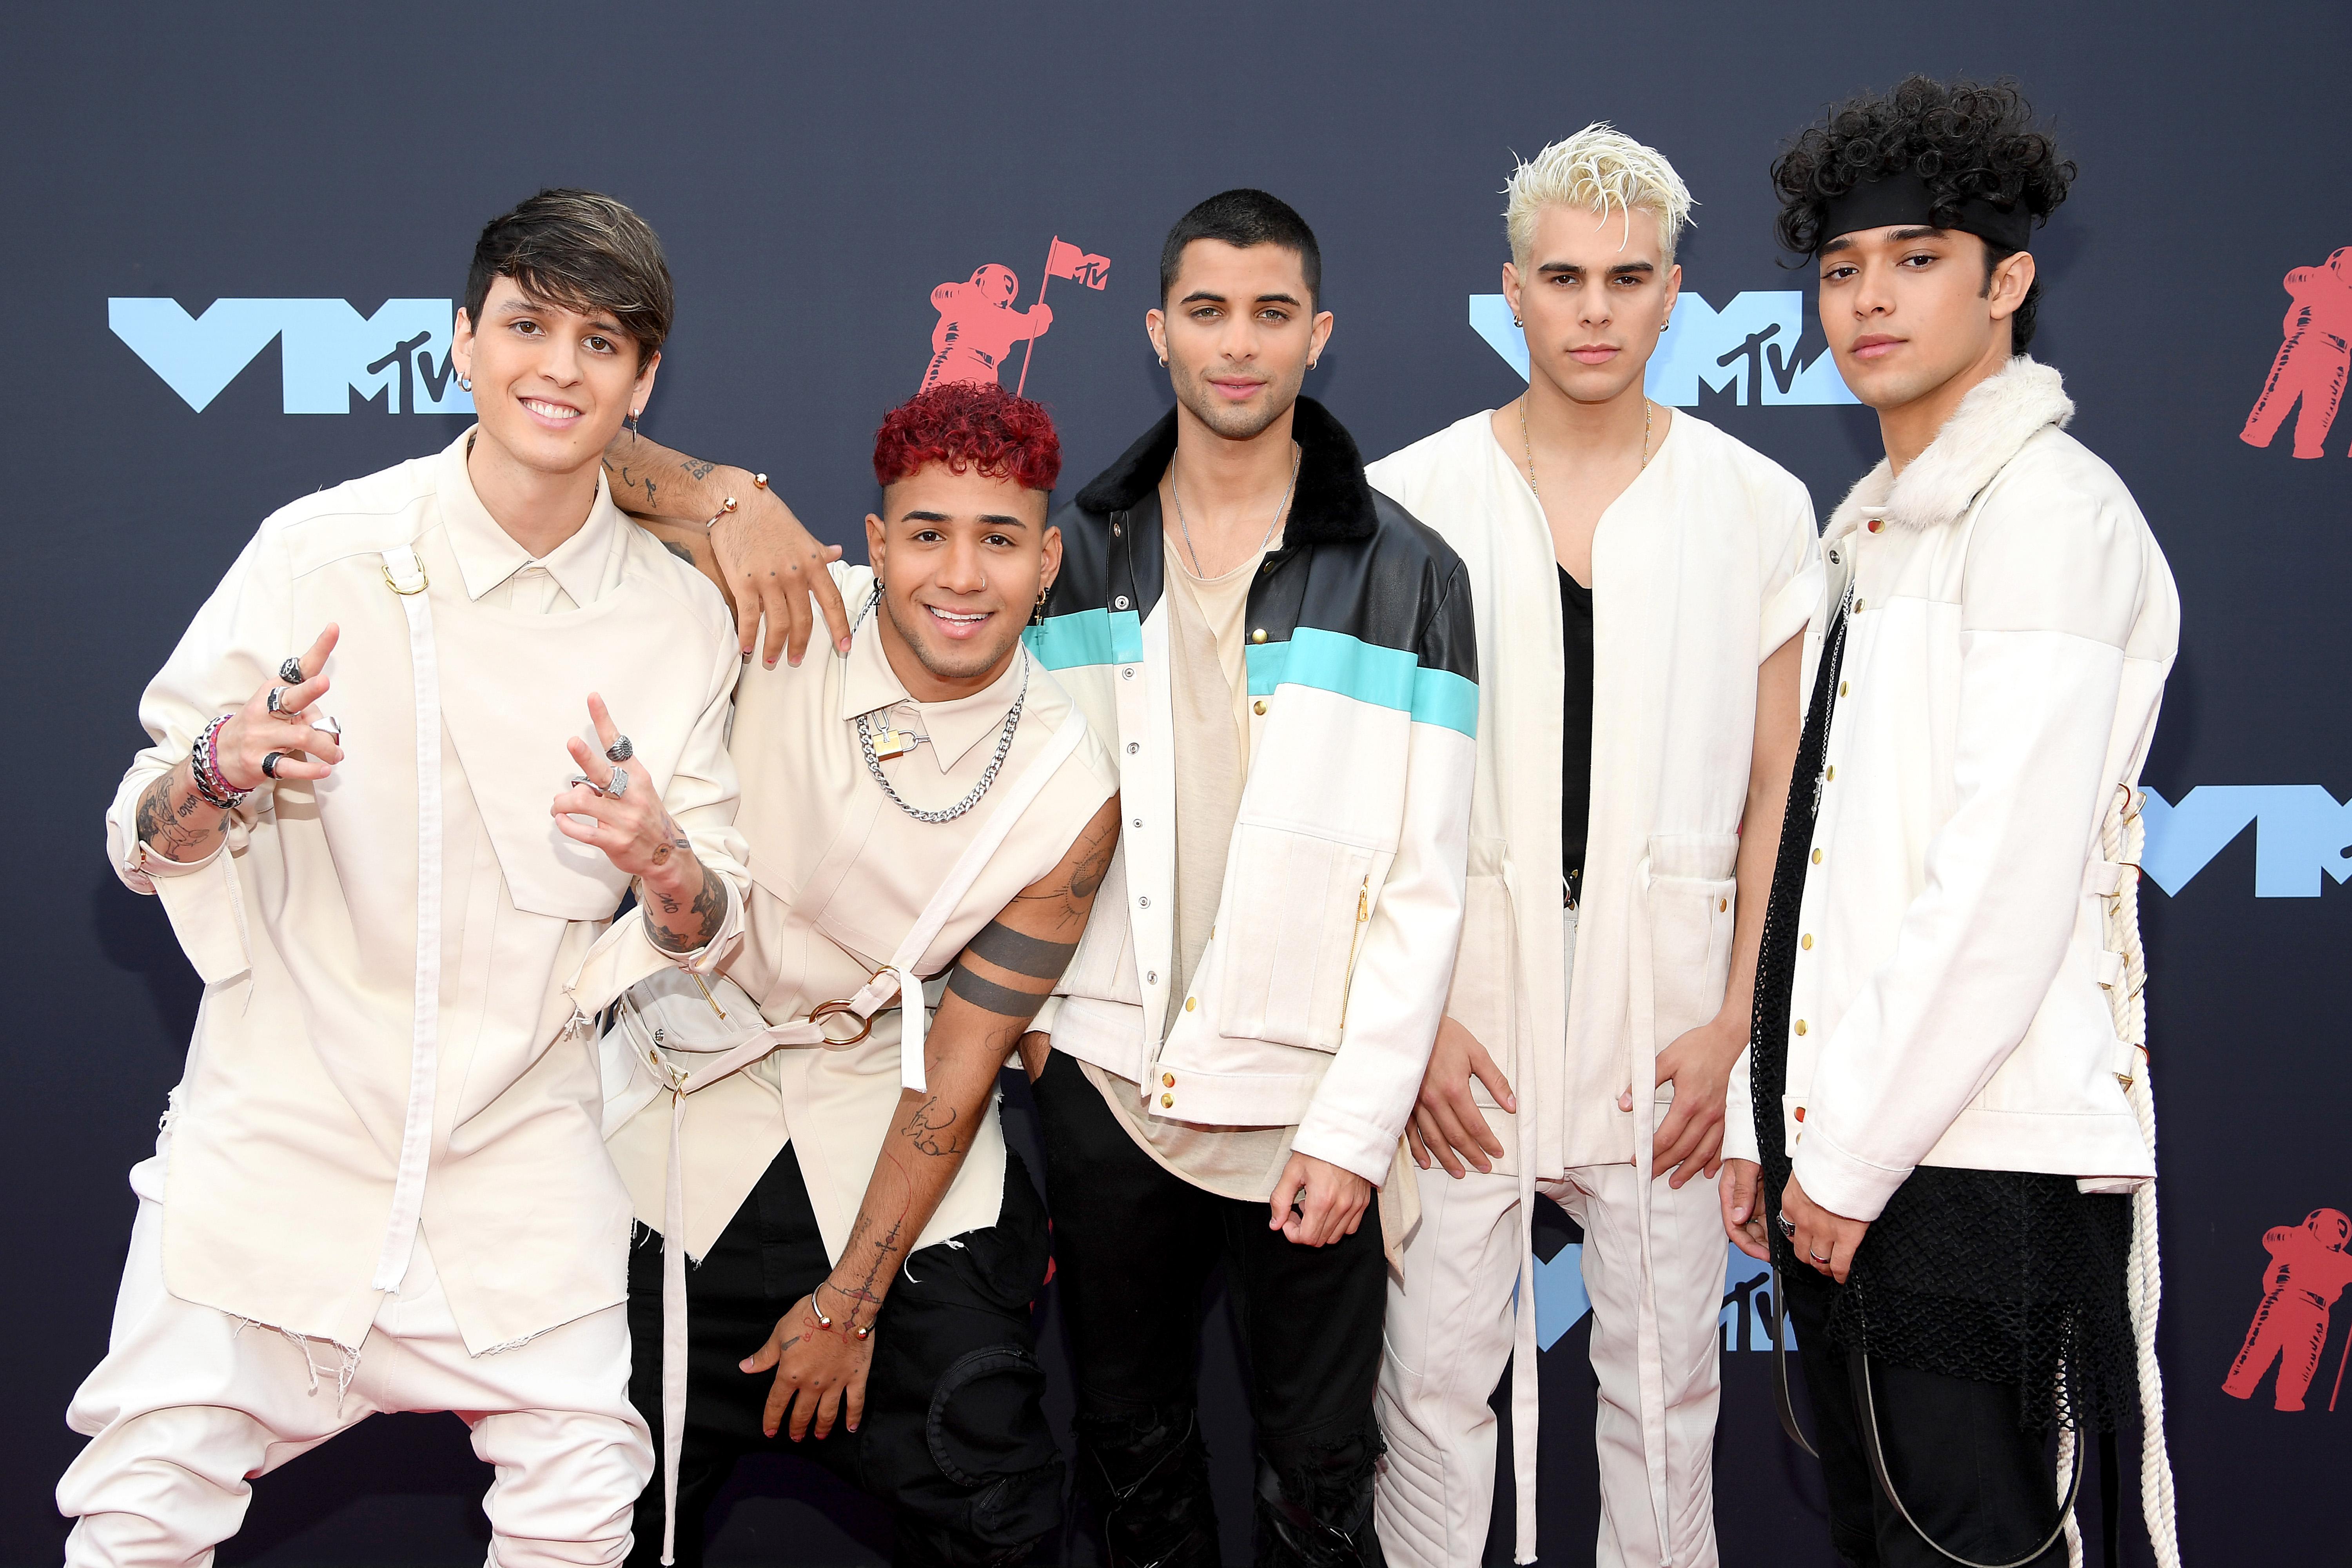 CNCO to Make Special Appearance at Hispanicize 2019